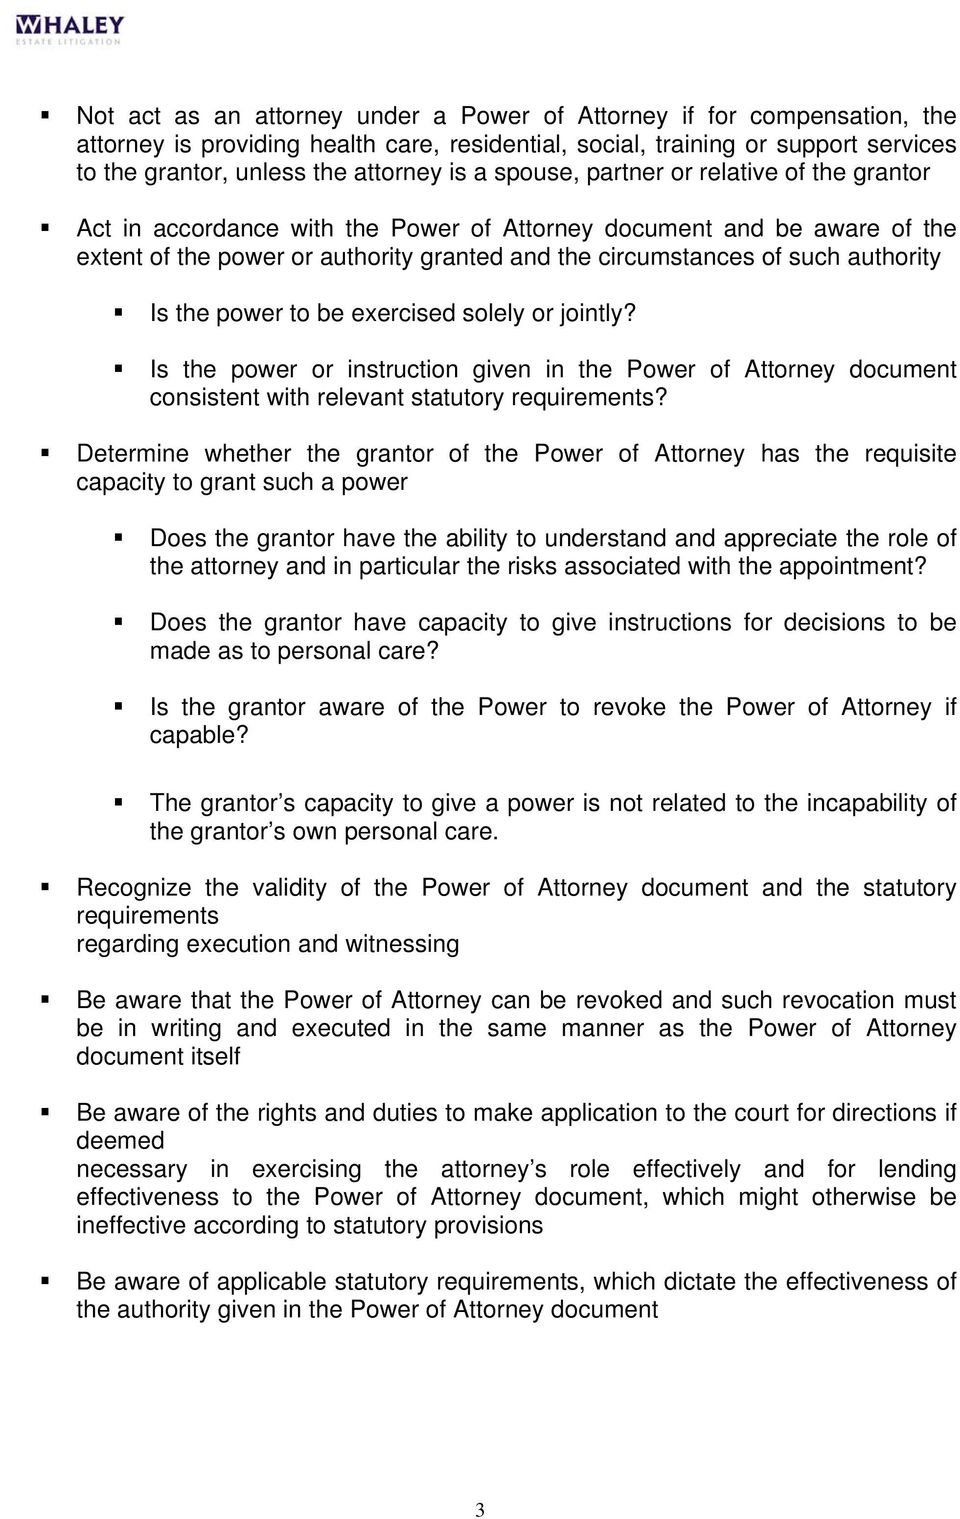 Is the power to be exercised solely or jointly? Is the power or instruction given in the Power of Attorney document consistent with relevant statutory requirements?